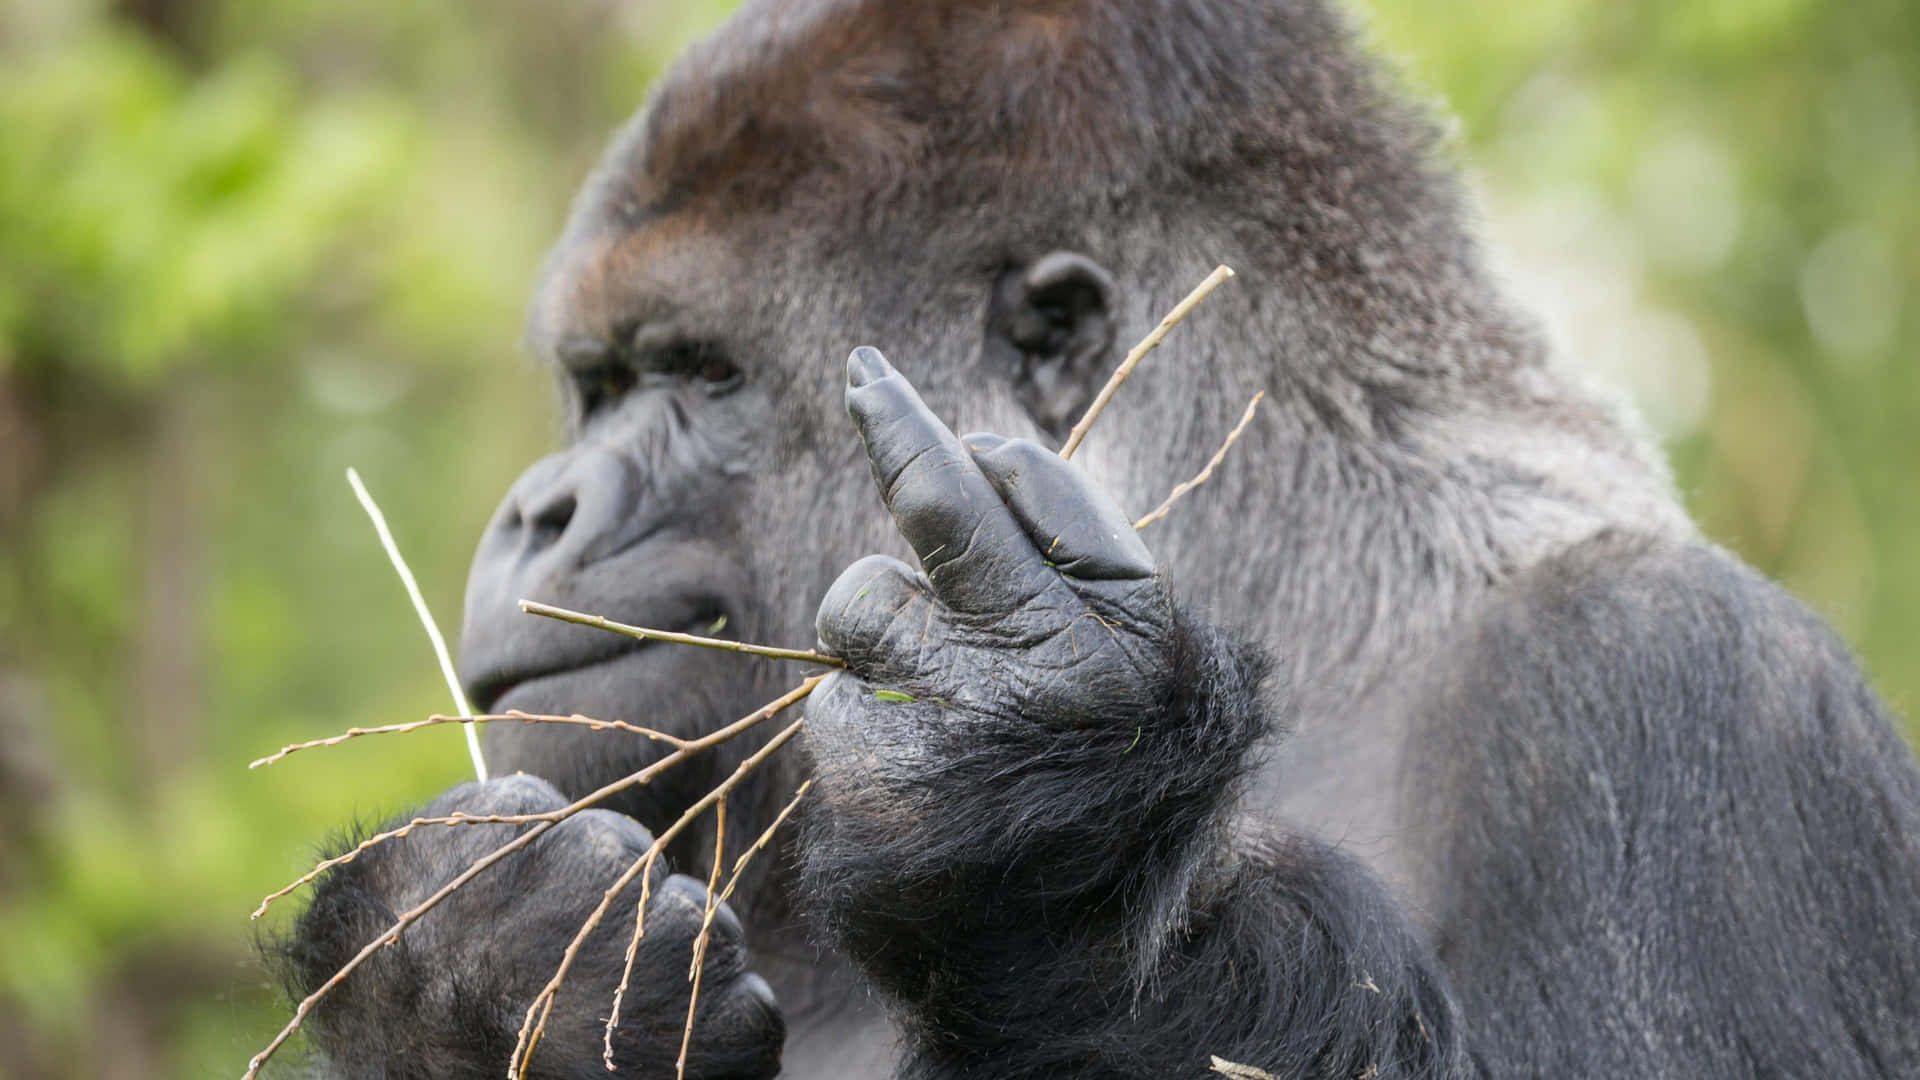 A Gorilla Is Holding A Branch In Its Hand Background